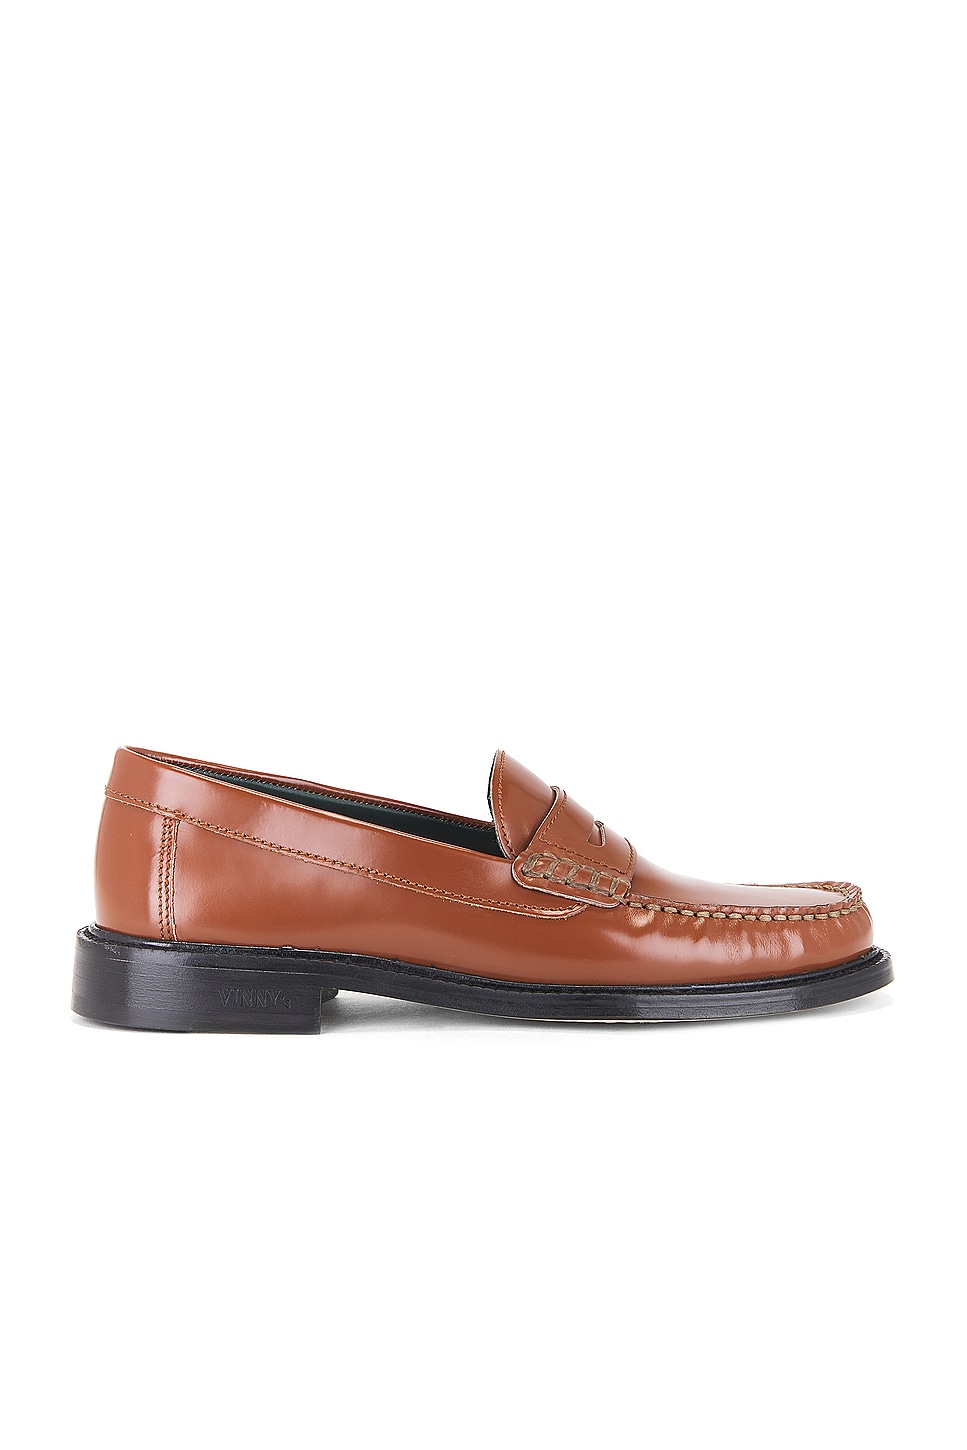 Yardee Mocassin Loafer in Brown